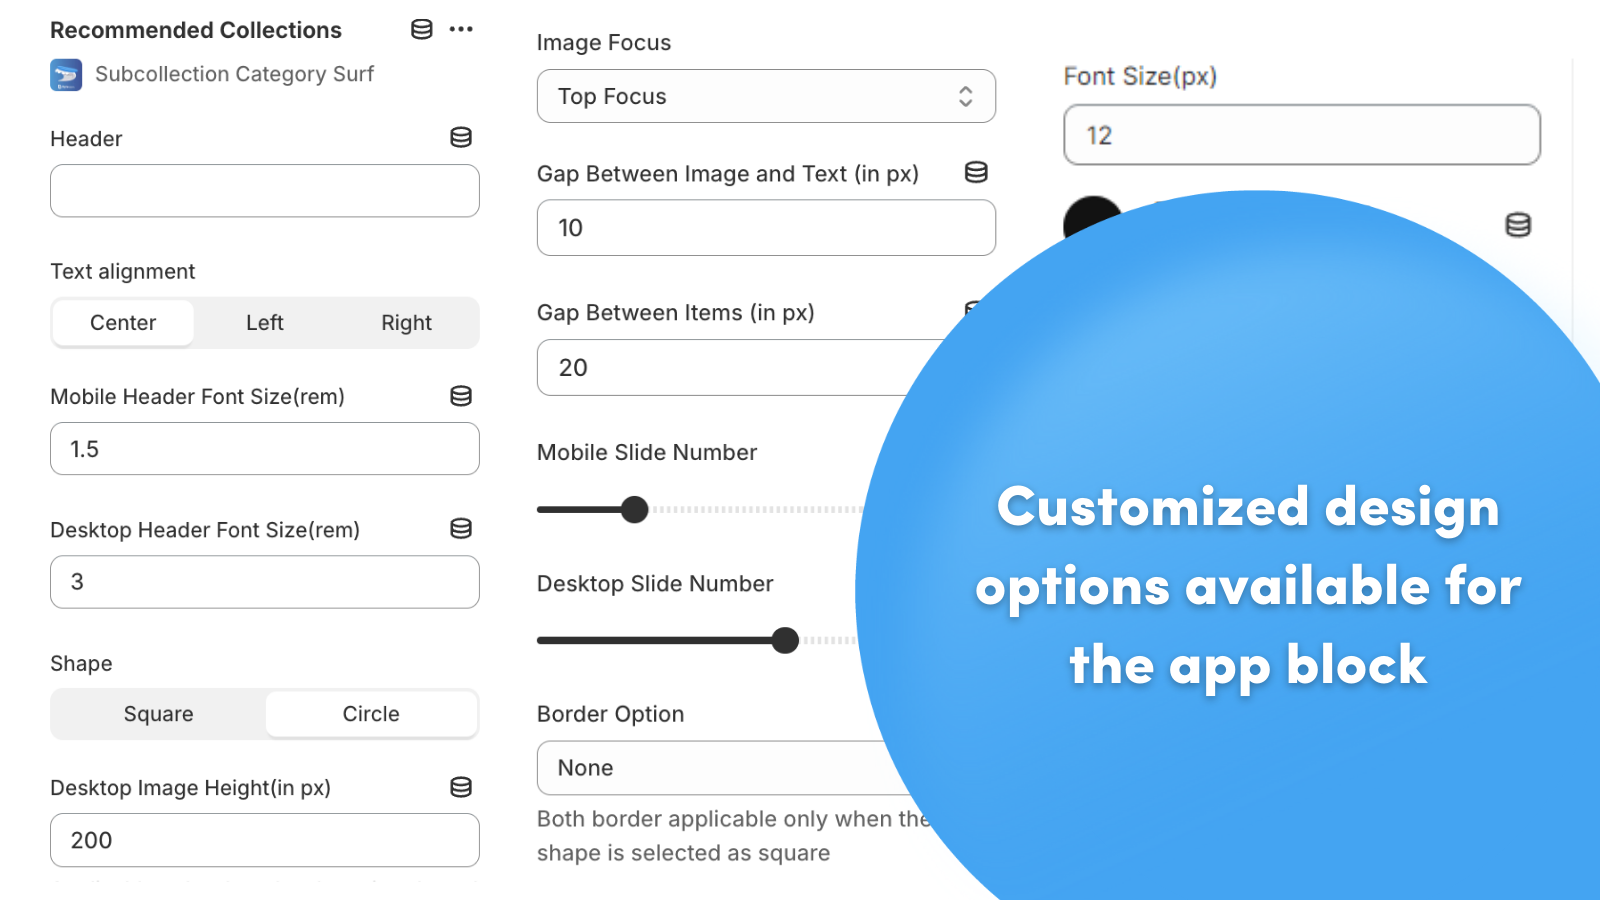 Customized design options available for the app block